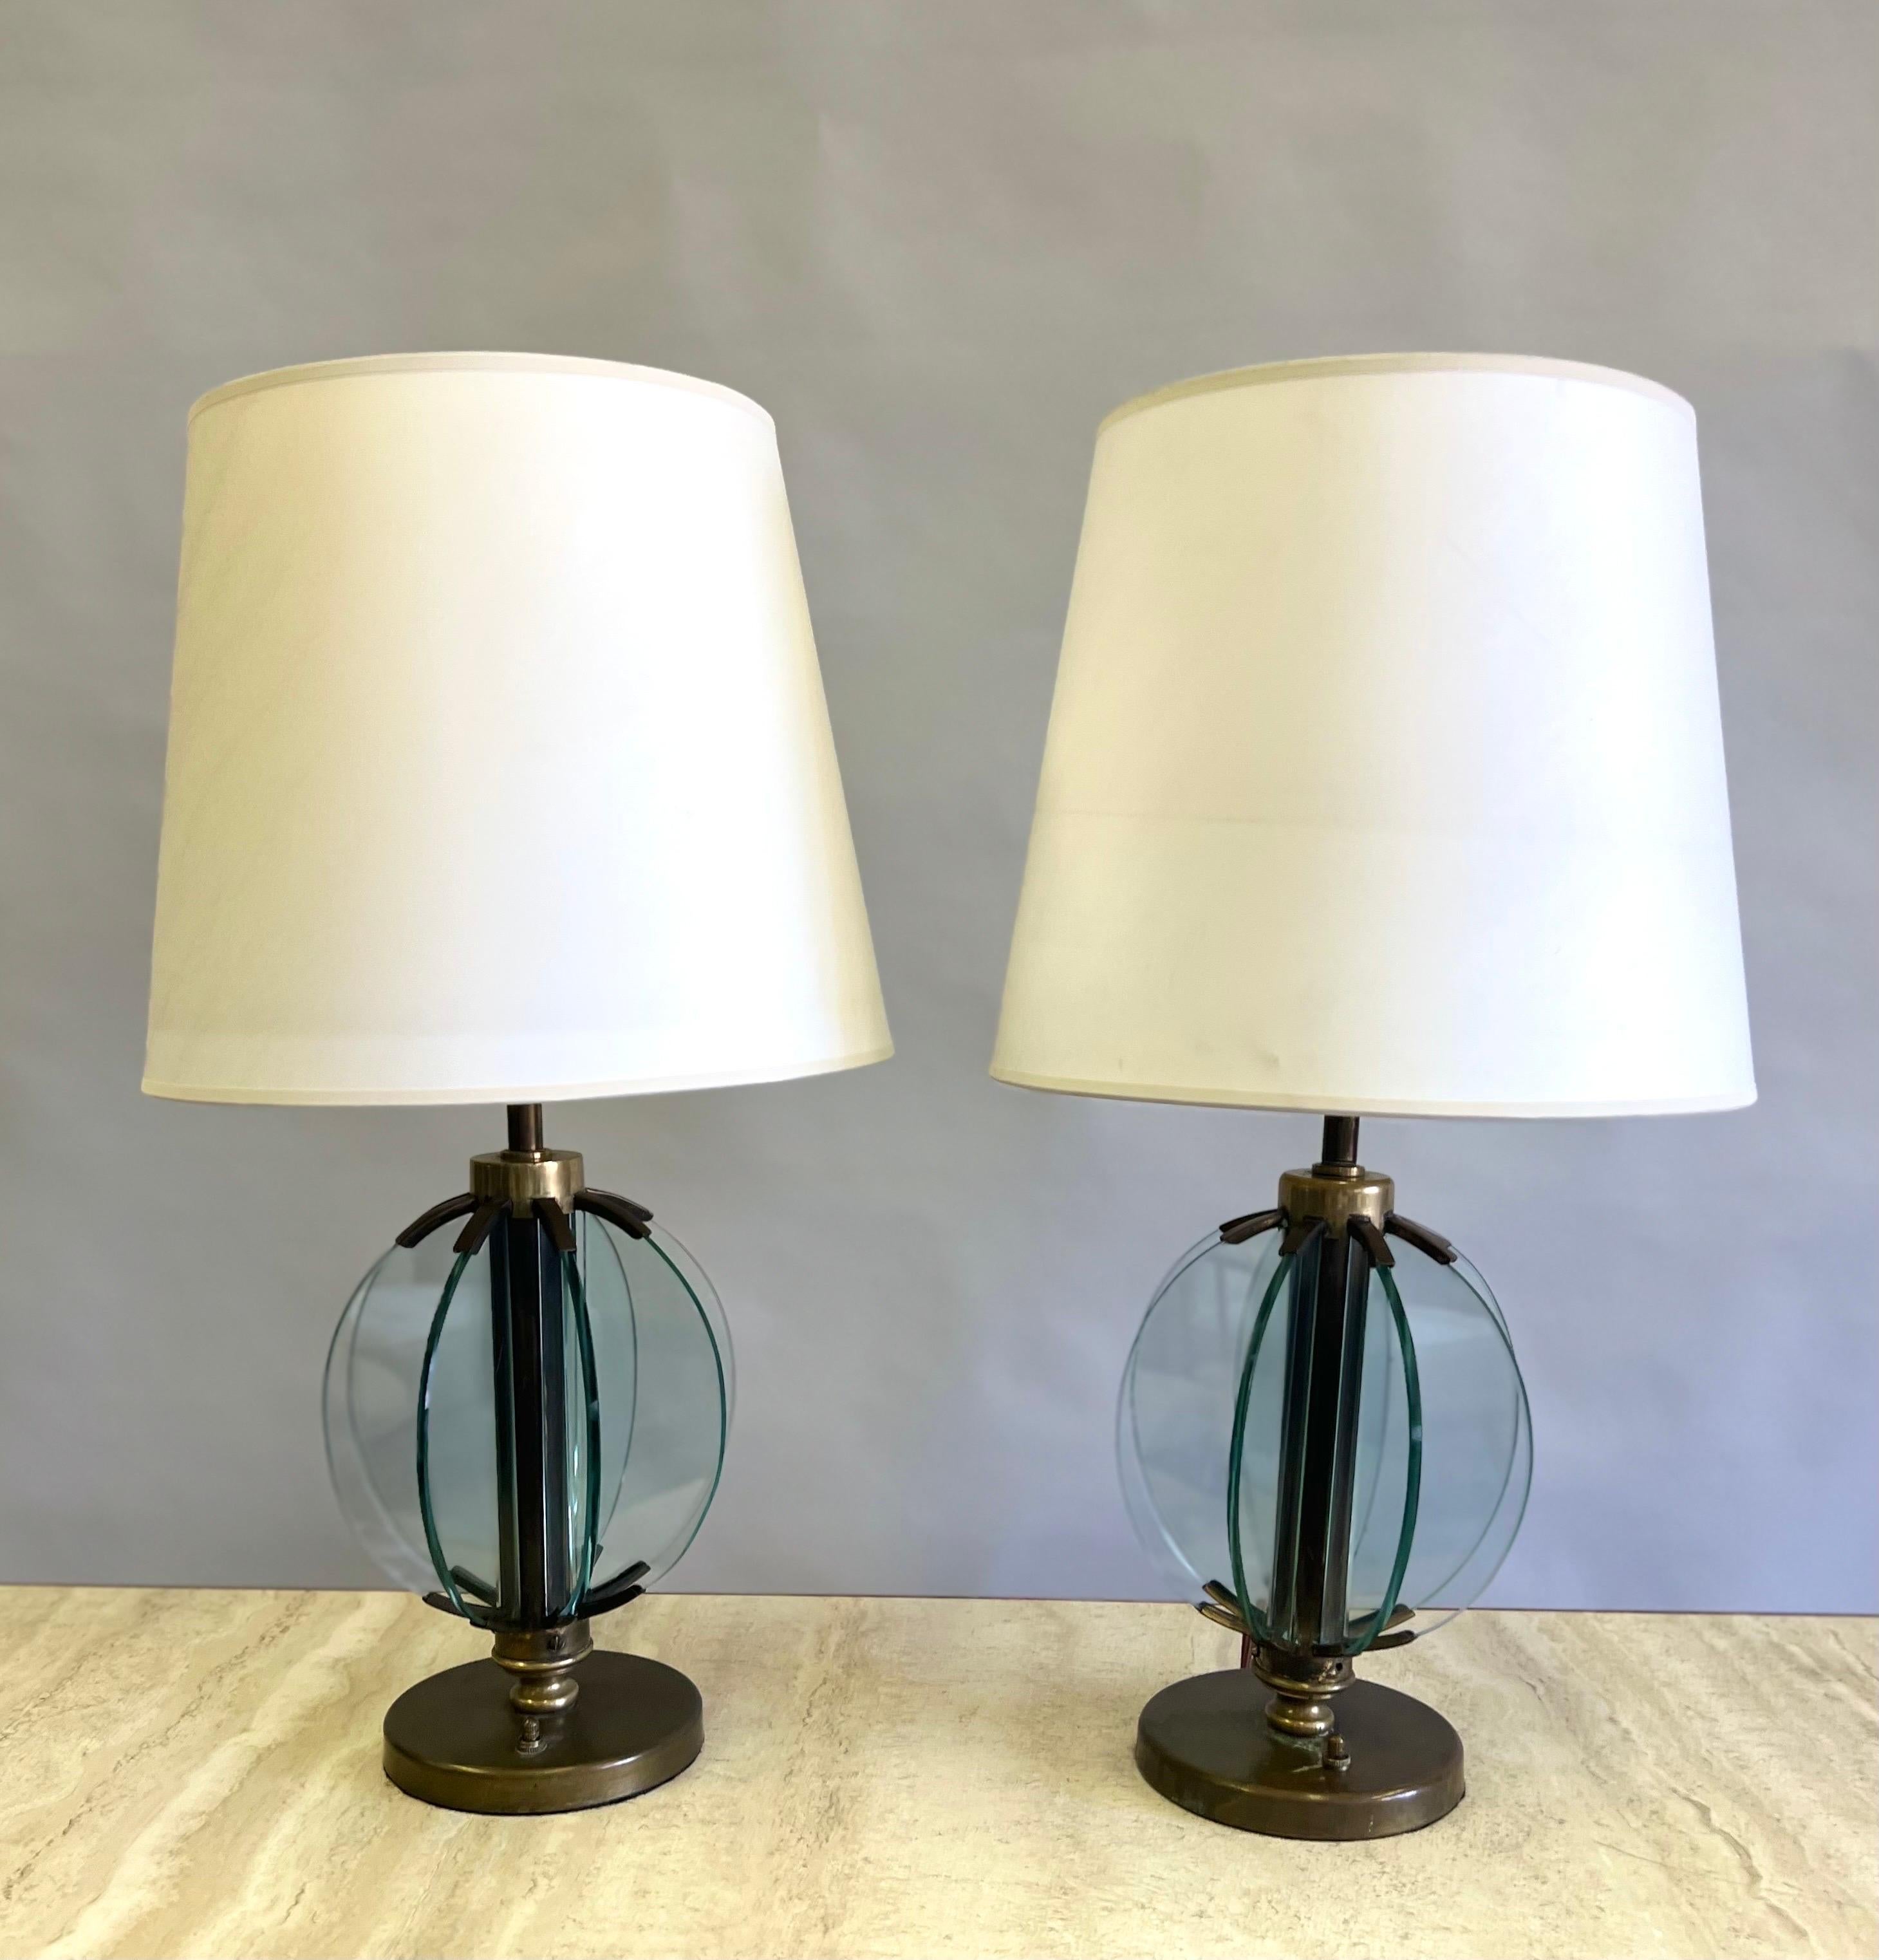 A rare and elegant pair of Italian Mid-Century Modern 'Astrolabe' table lamps by Pietro Chiesa for Fontana Arte reflecting the Italian Modern Neoclassical movement of the 1930-1940 period (Novecento). The pieces are masterpieces of design  composed